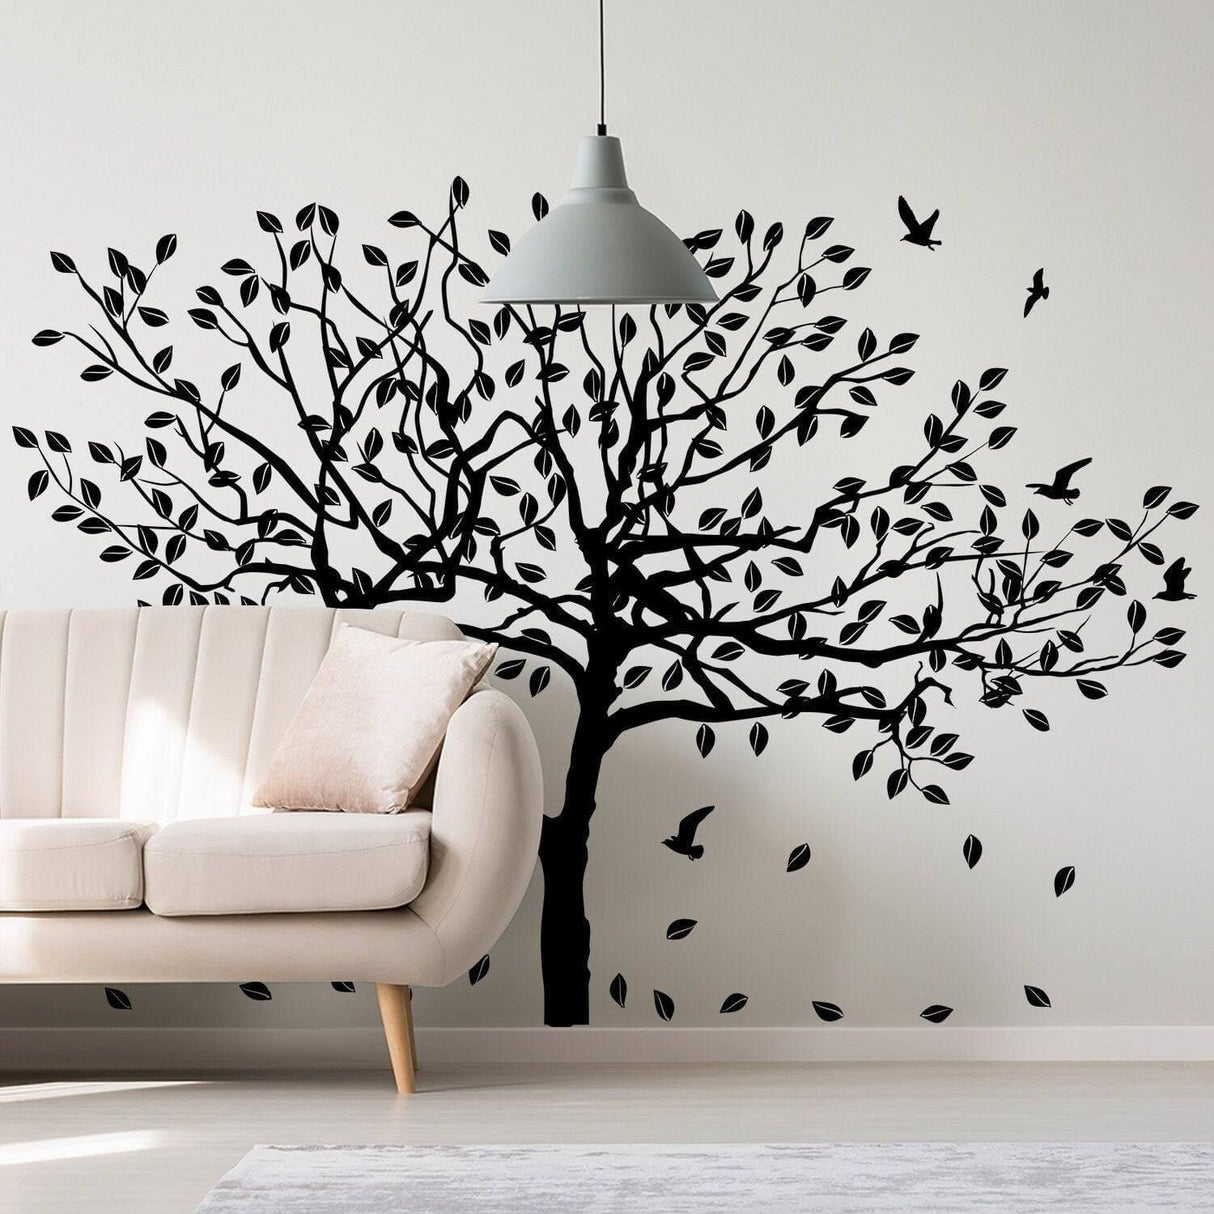 Nature's Serenity, Vinyl Wall Decal, Artistic Design, Easy to Install - 10  x 16